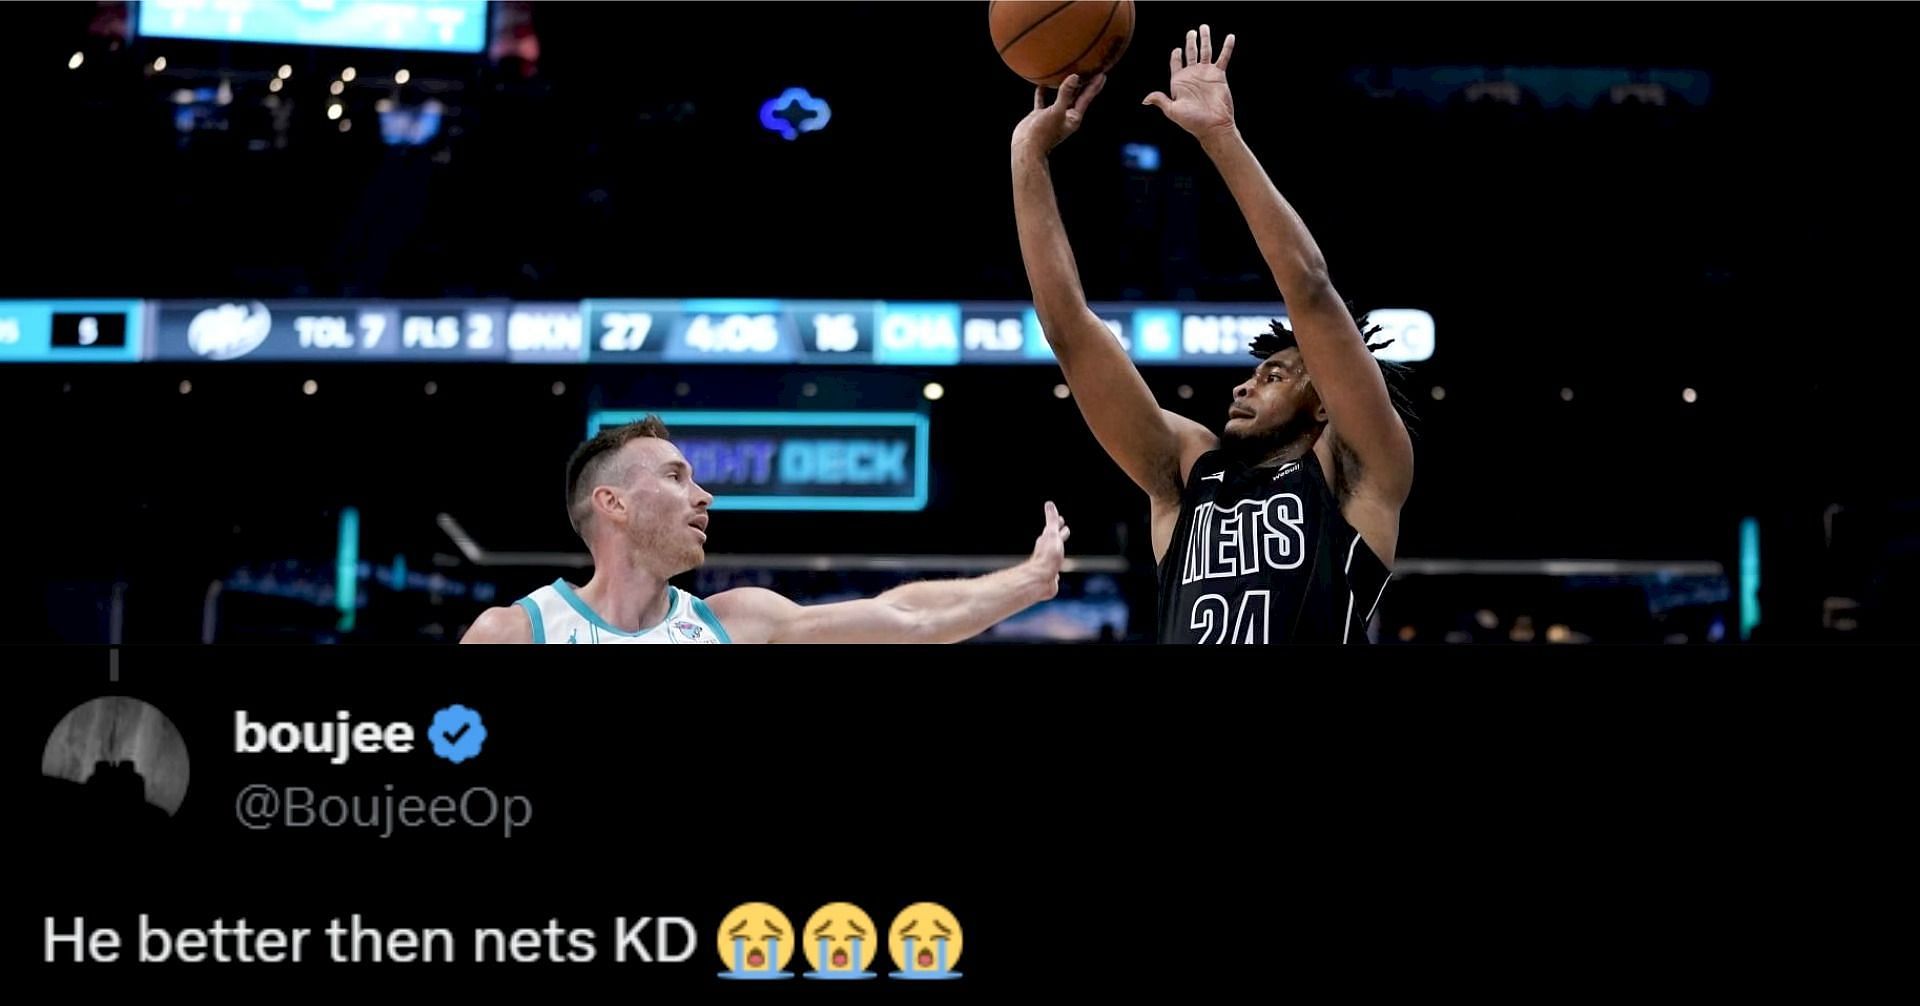 NBA fans in awe of Cam Thomas, who continues hot streak with 33 points vs. Hornets